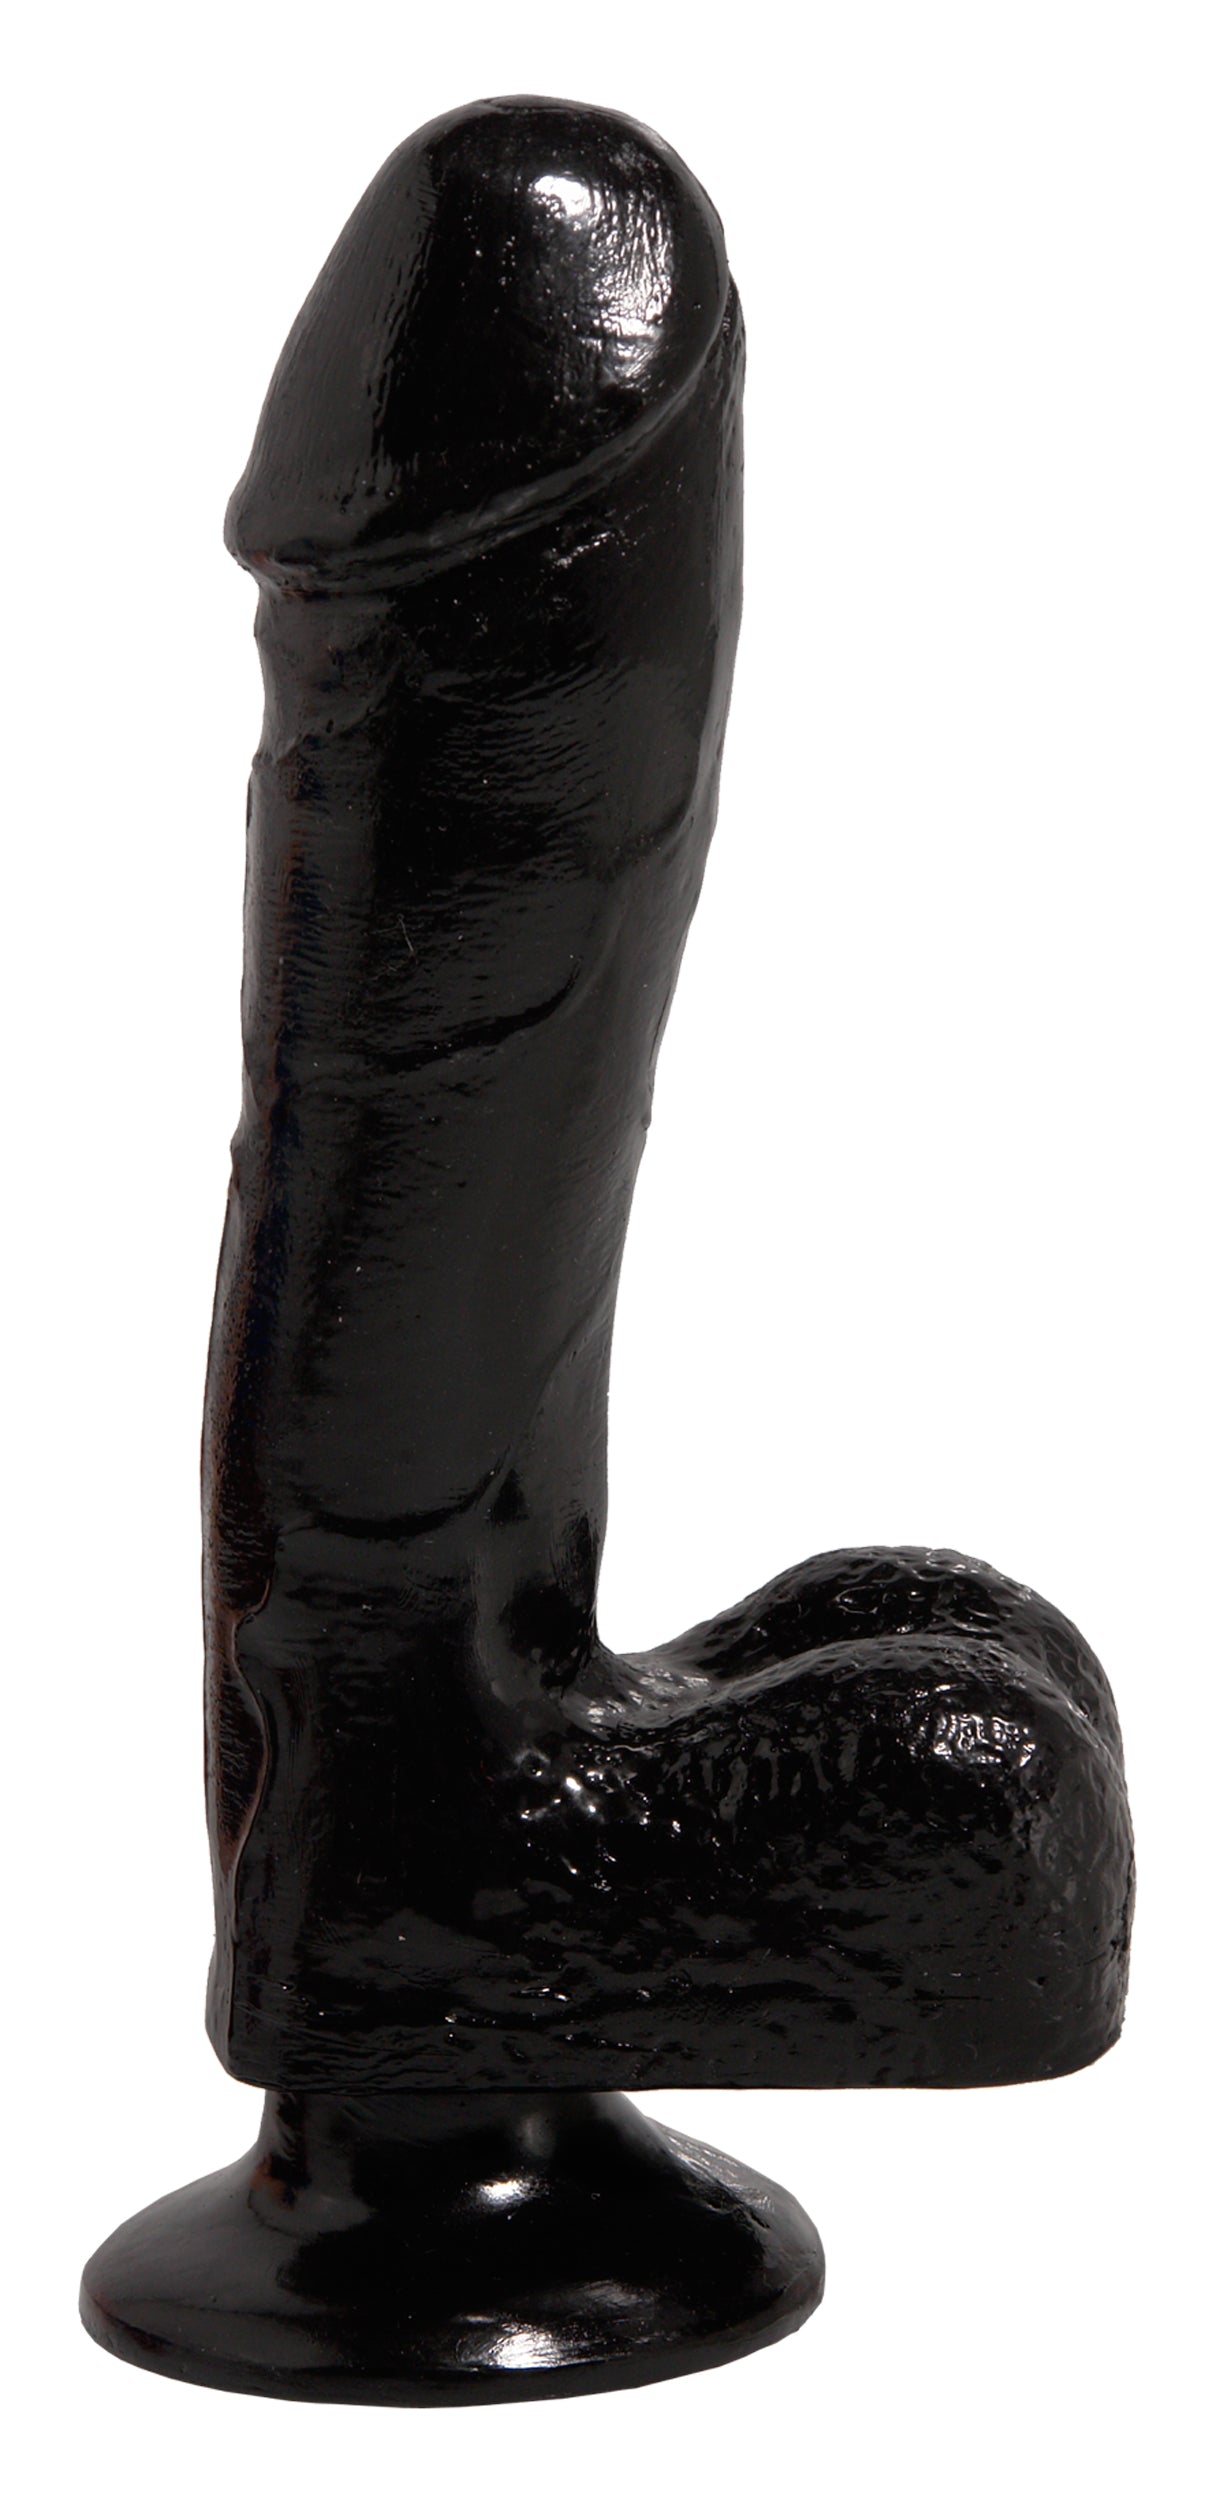 Basix Rubber Works 7.5in Dong W-suction Black